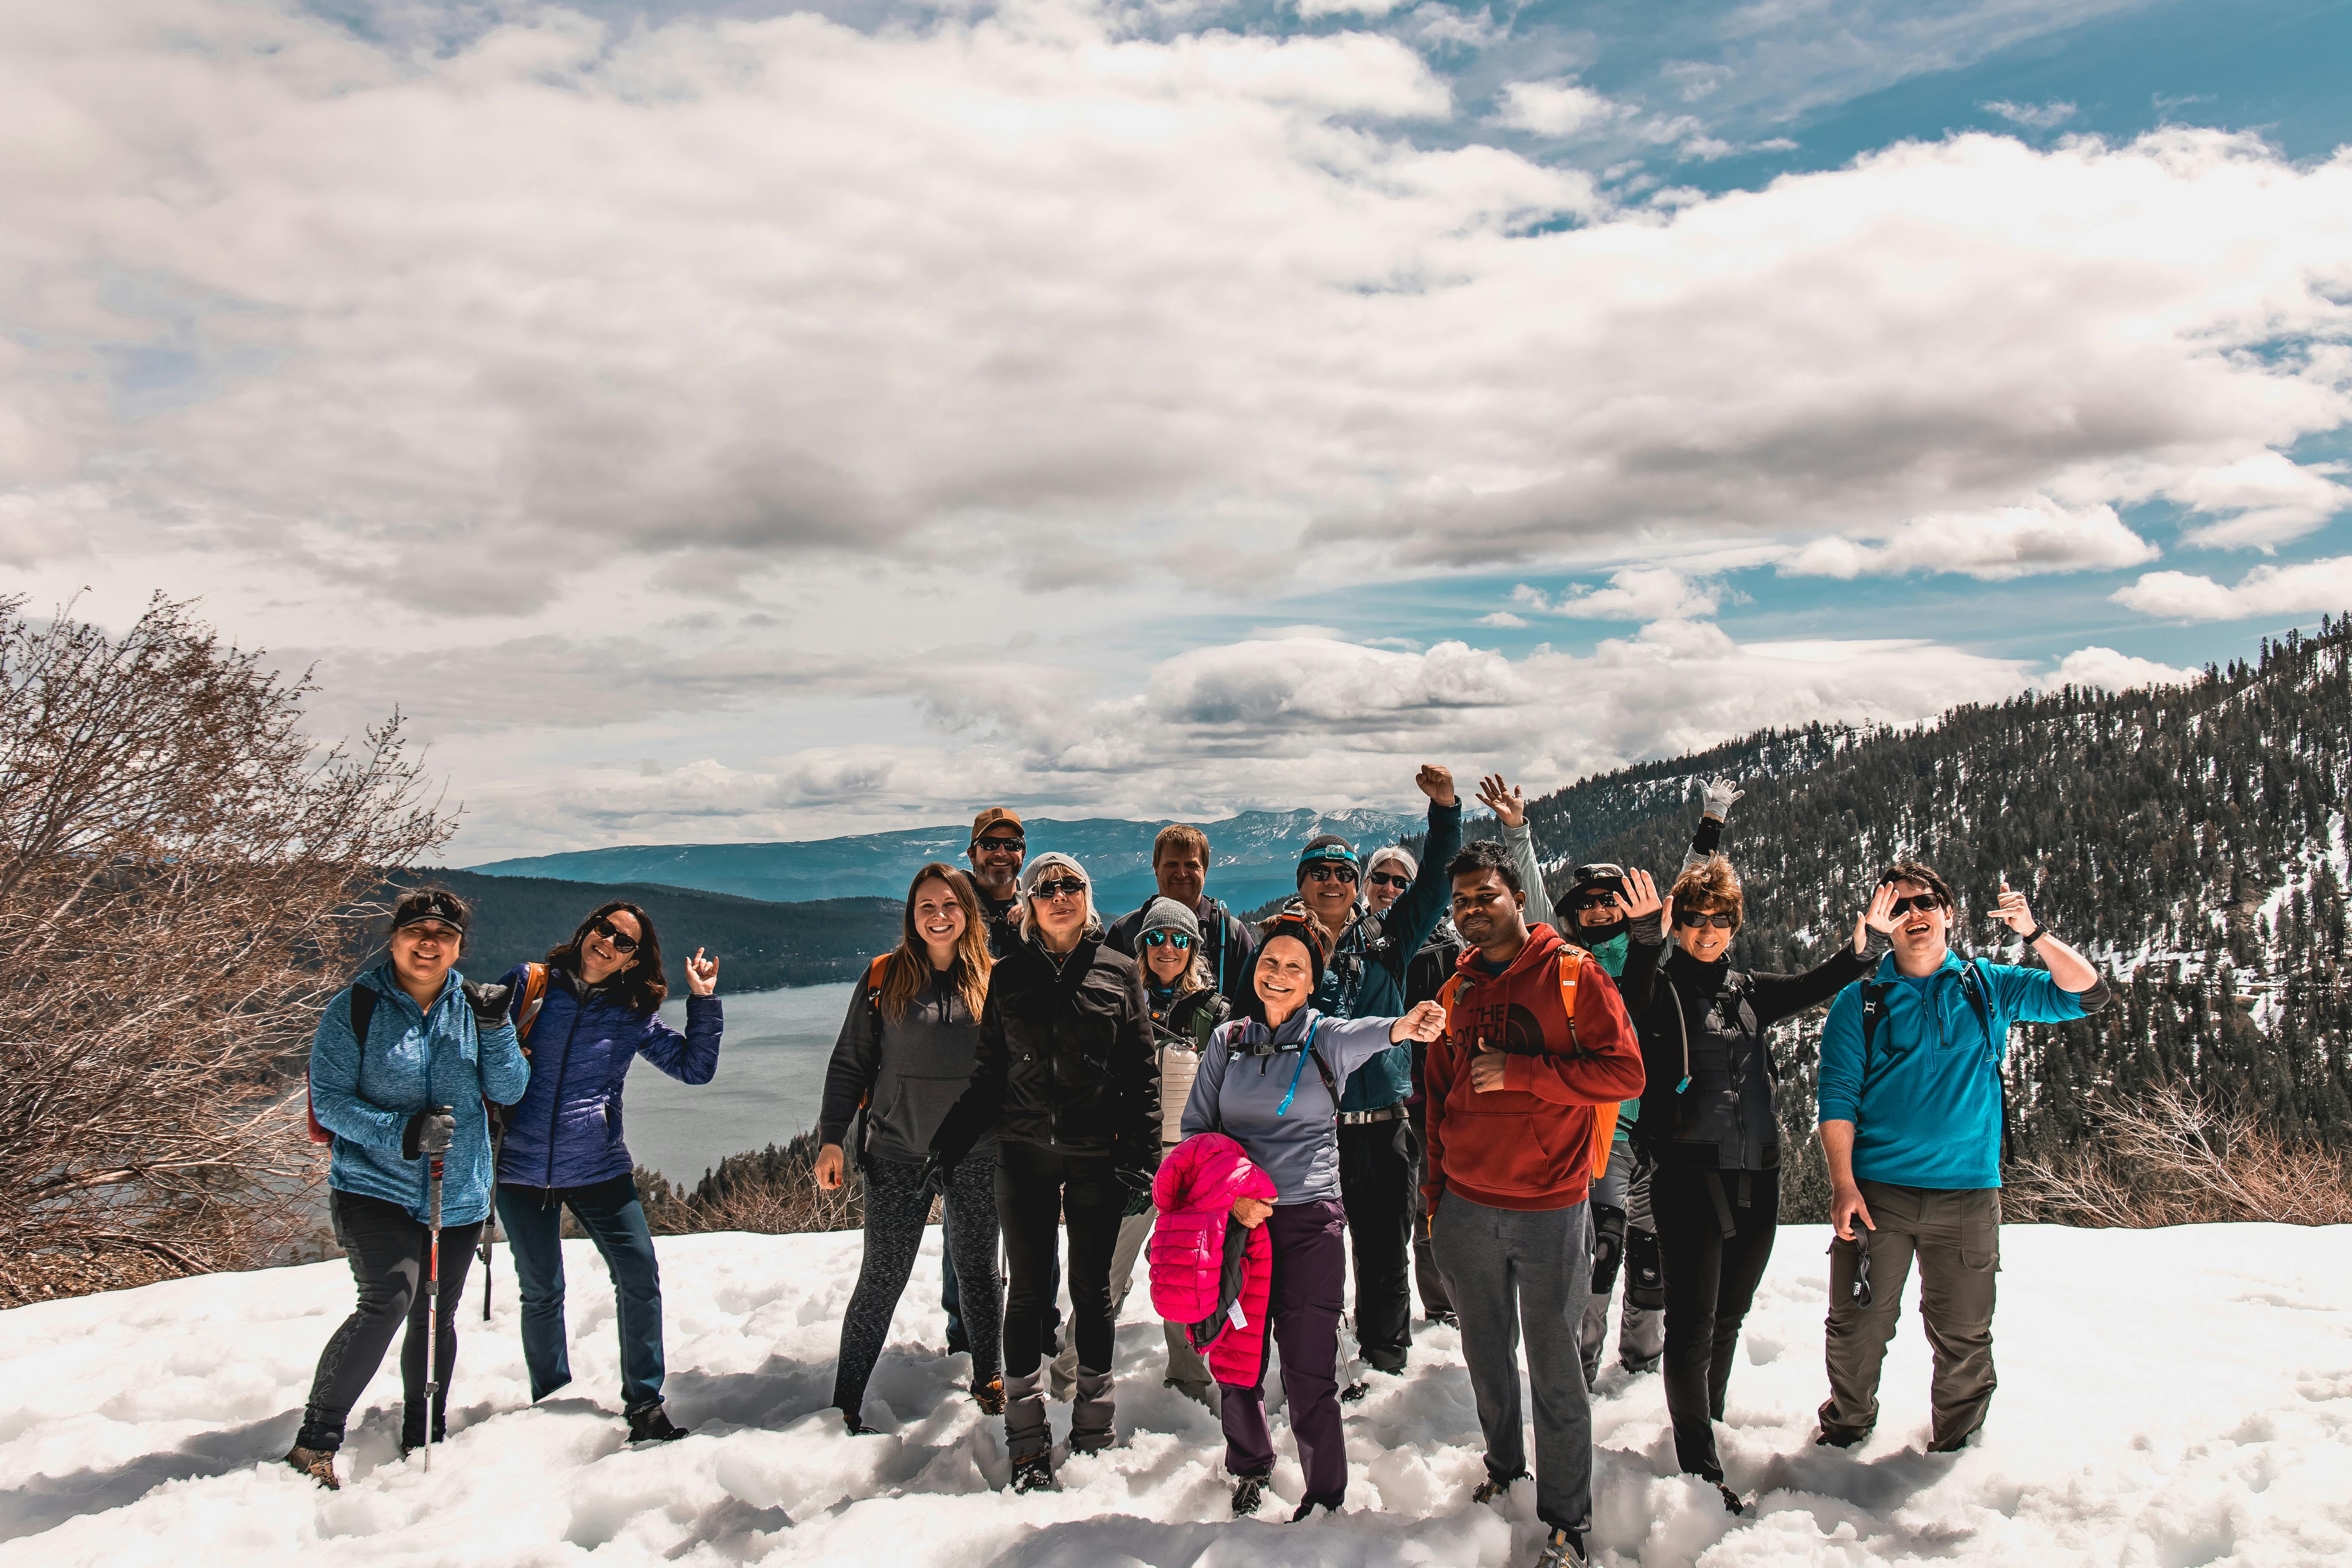 A group of people stand on a snowfield and smile for the camera while on a hike.